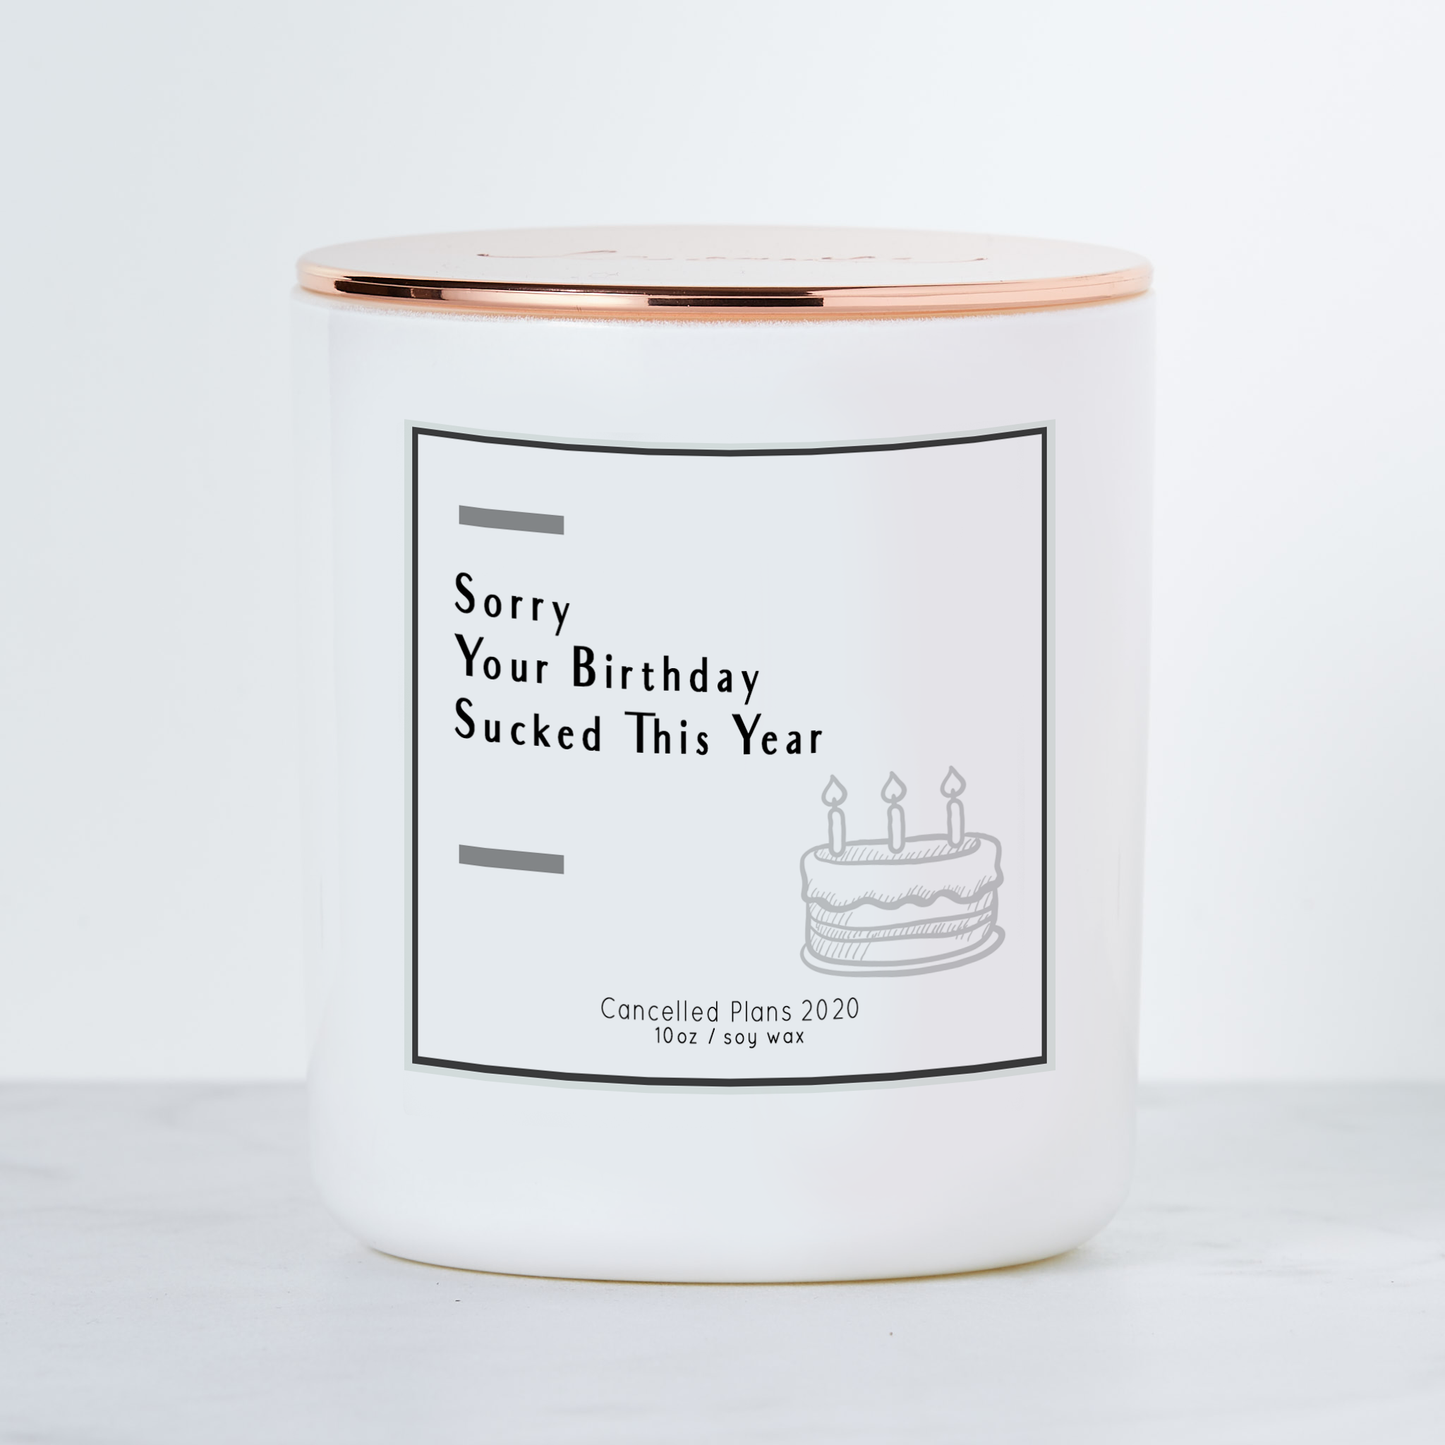 Sorry Your Birthday Sucked This Year Candle